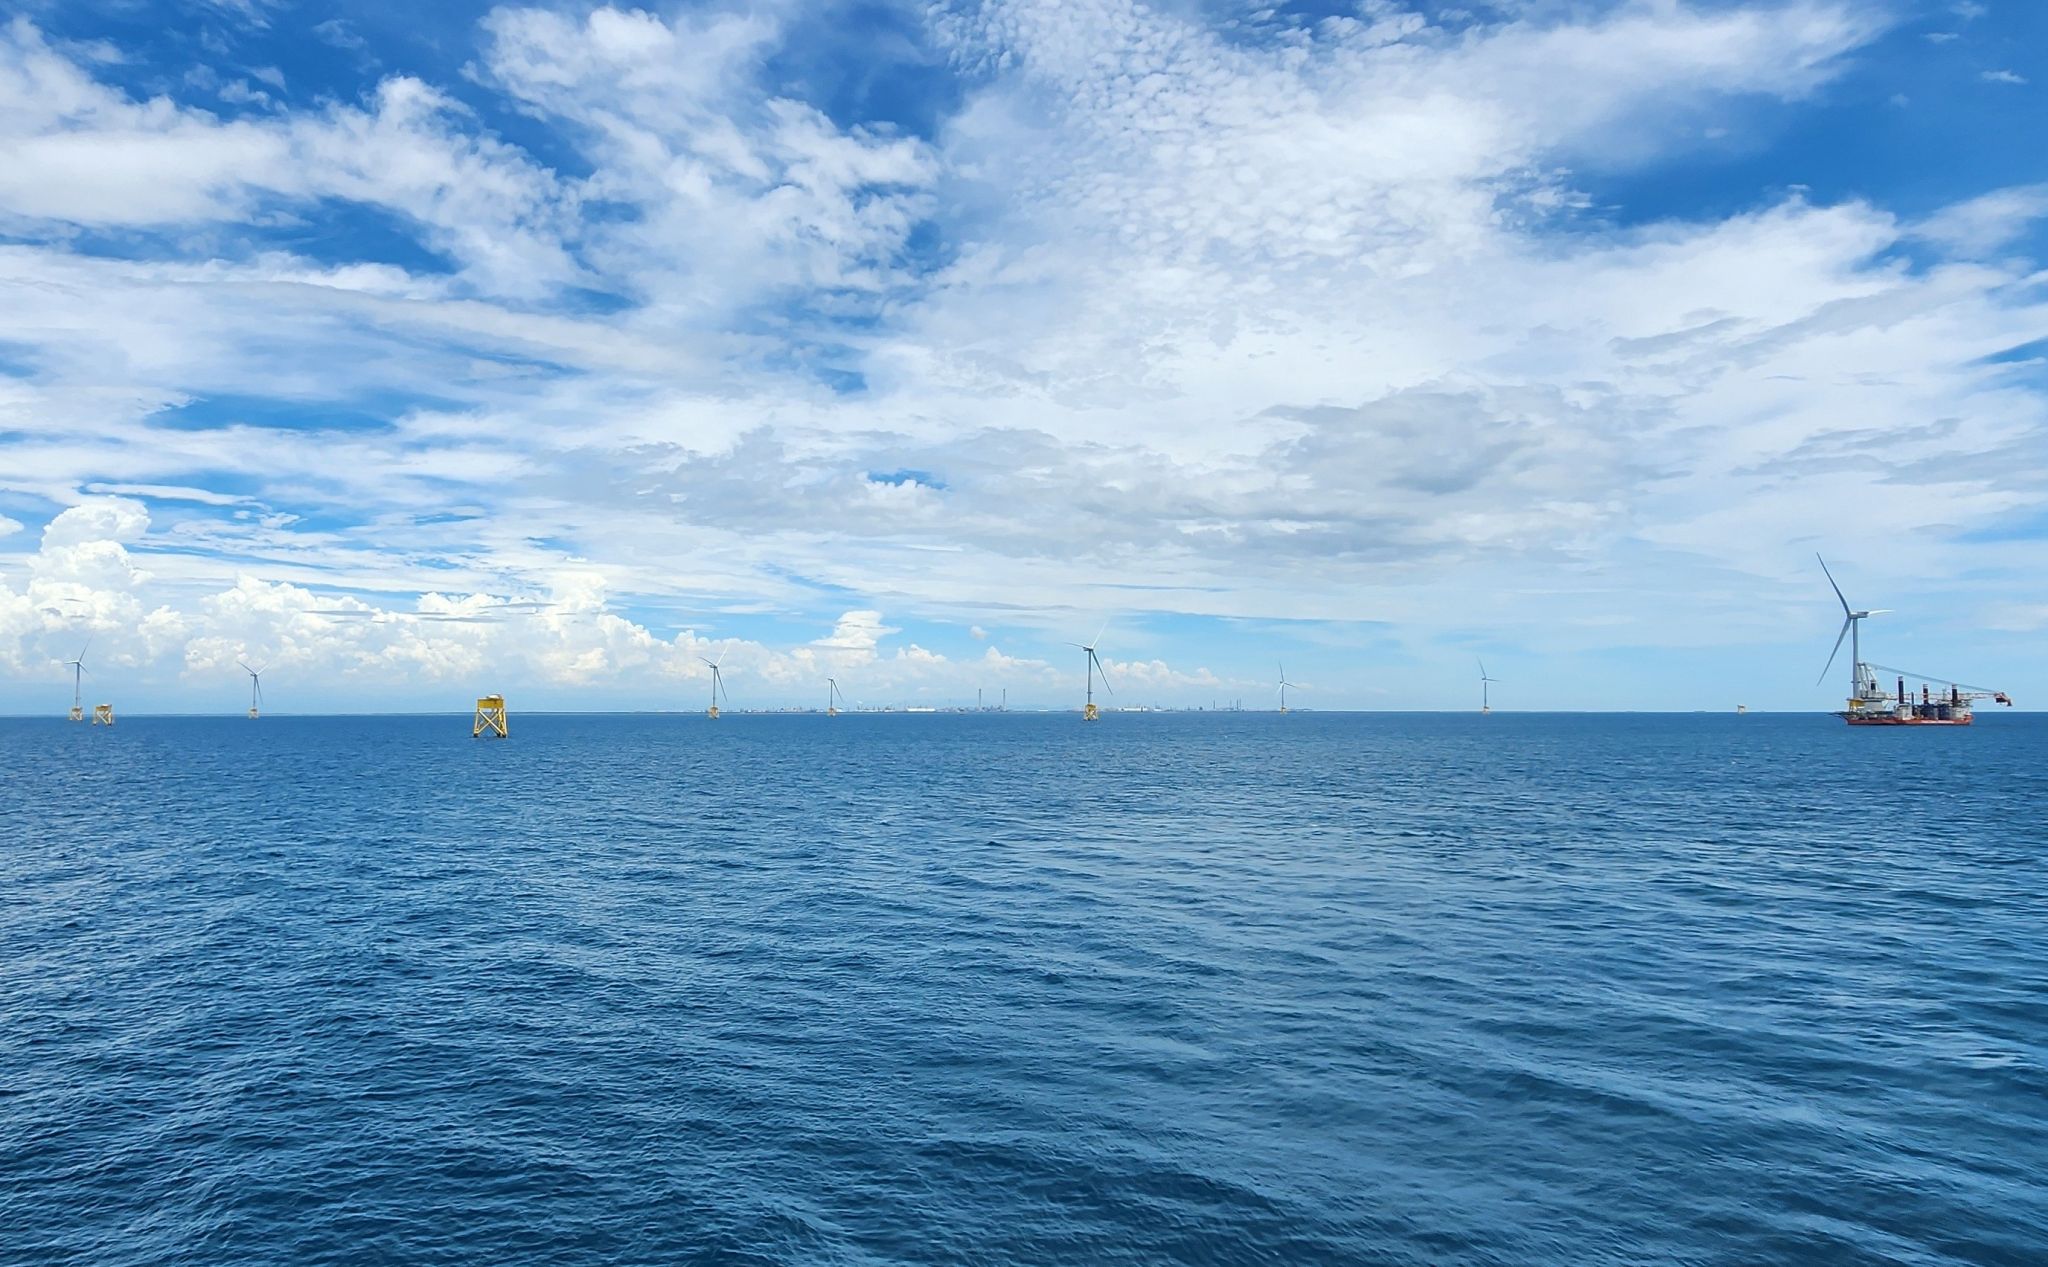 A photo of the Zhong Neng offshore wind farm in Taiwan under construction